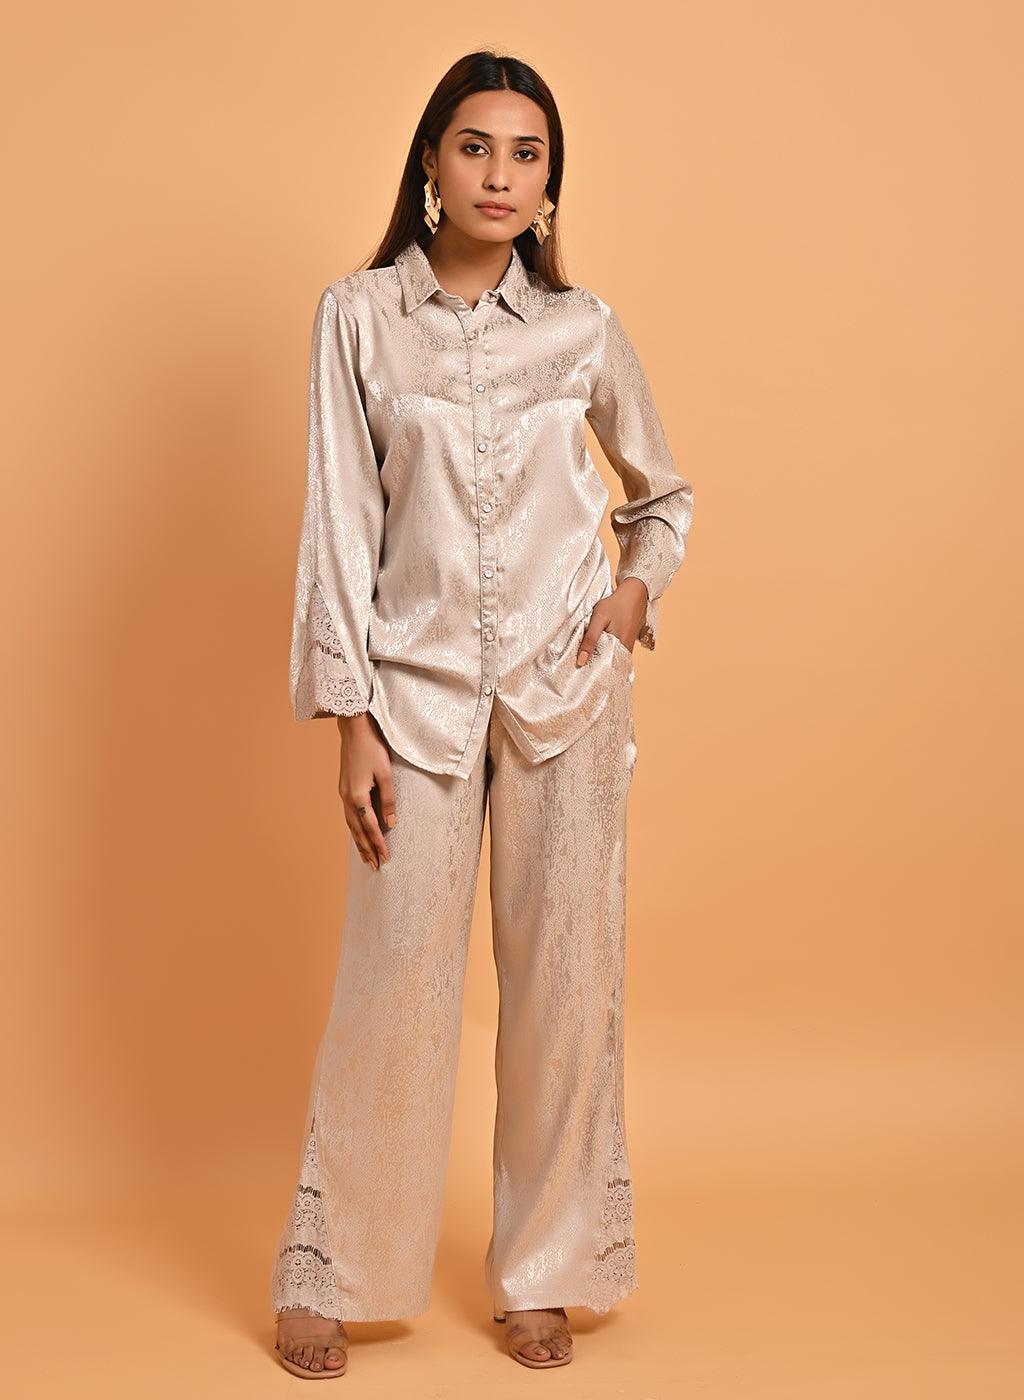 Beige Co-ord Set with Net Inserts at Sleeves - Lakshita